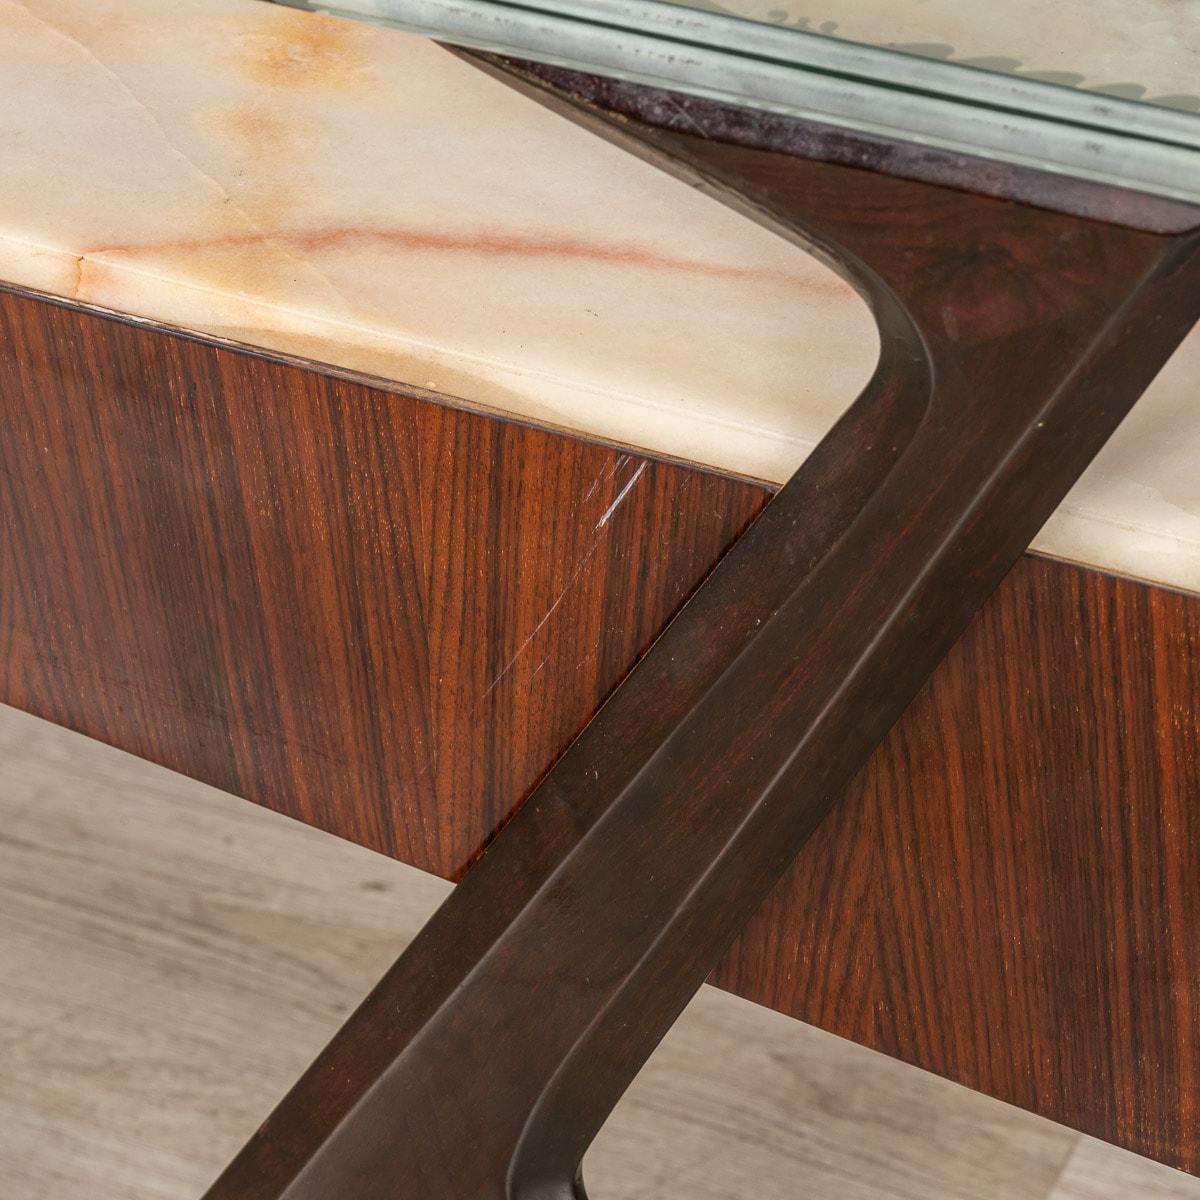 A Pair Of Italian Rosewood Side Tables By Vittorio Dassi, c.1950 For Sale 5